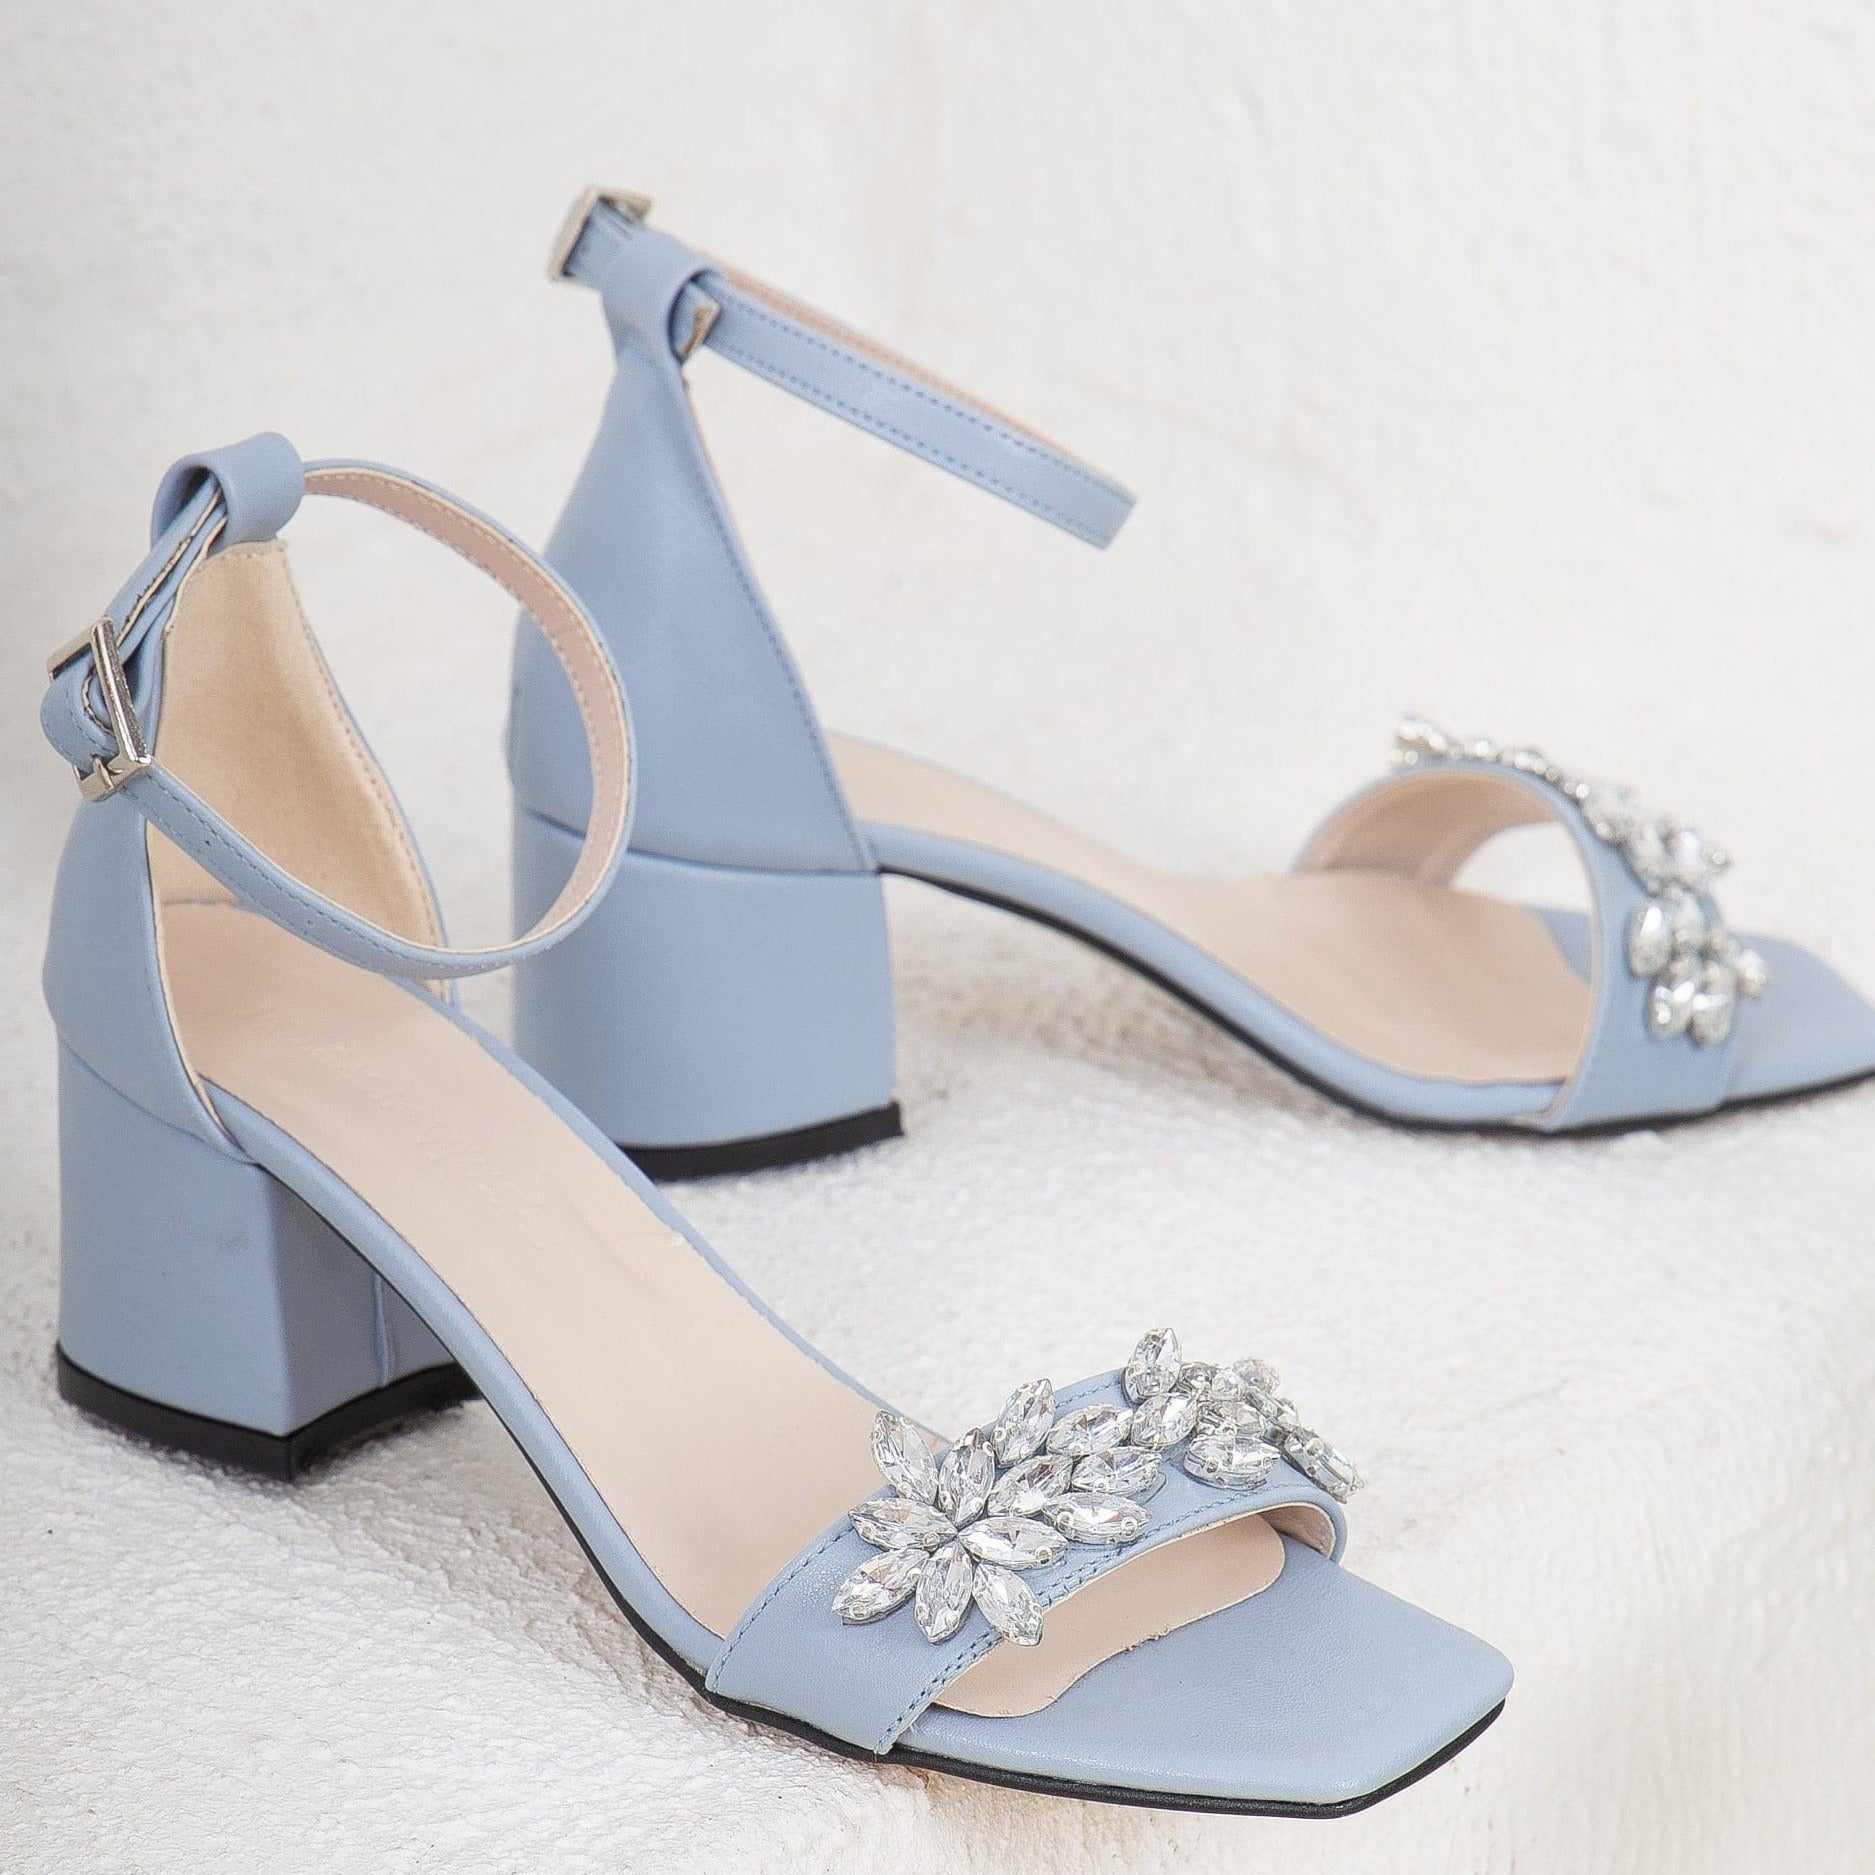 These 25 Festive Color Palettes Were Made for a Winter Wedding | Wedding  shoes heels, Bride shoes, Blue heels wedding